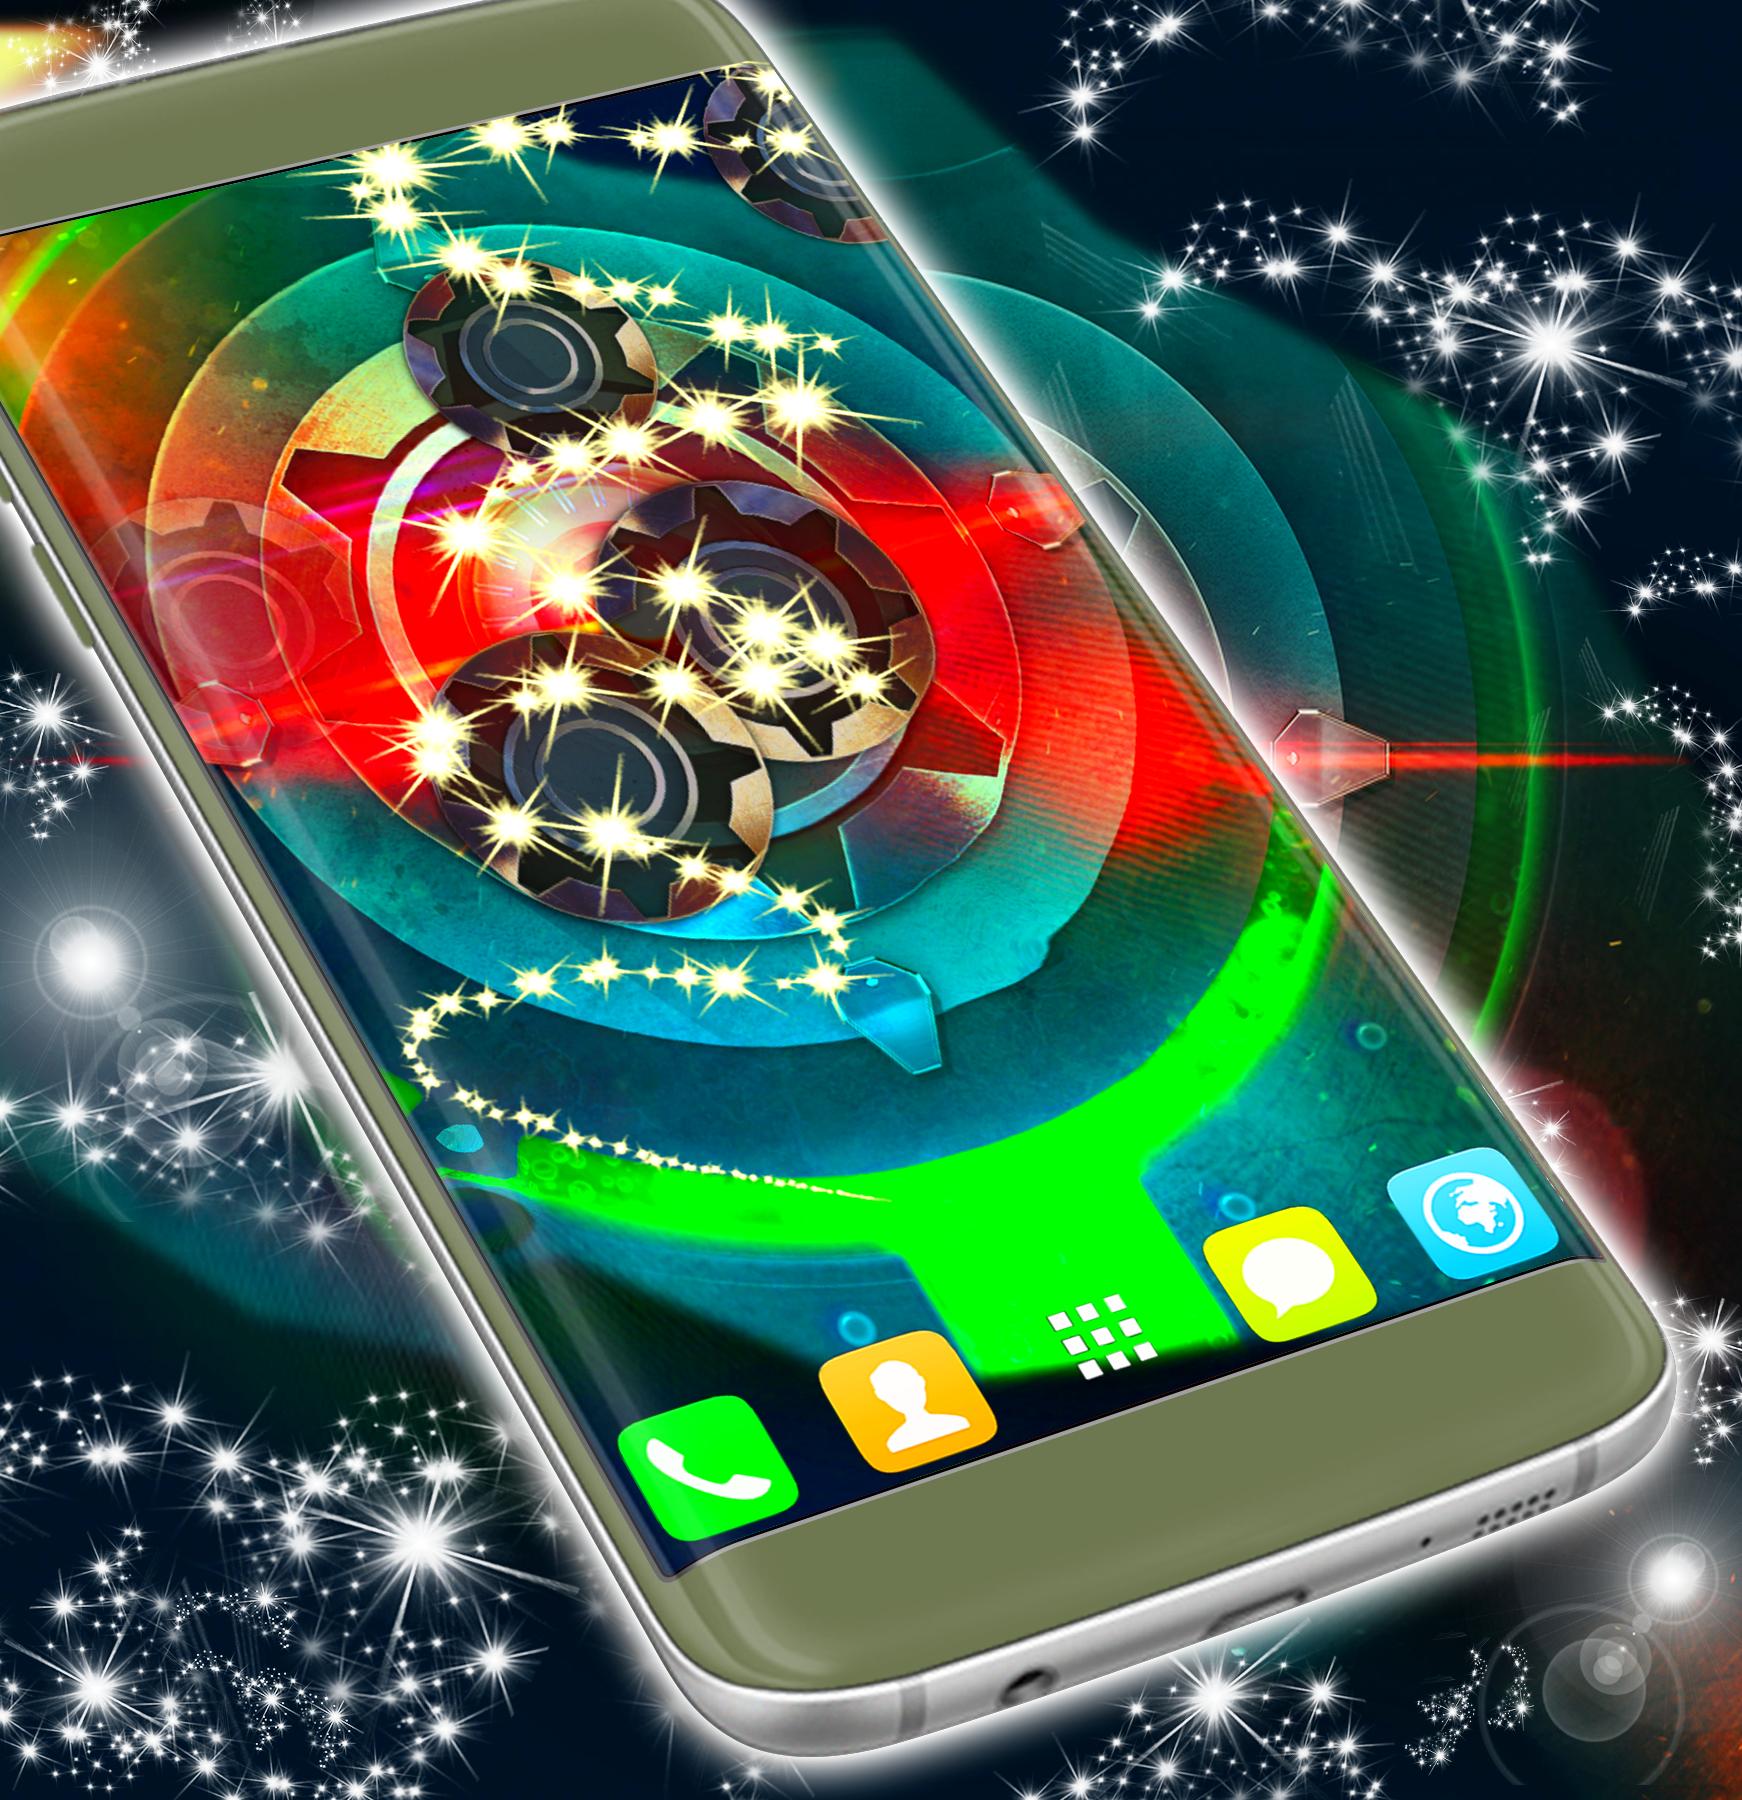 Mechanical Wallpaper Apk 1 286 13 7 Download For Android Download Mechanical Wallpaper Apk Latest Version Apkfab Com